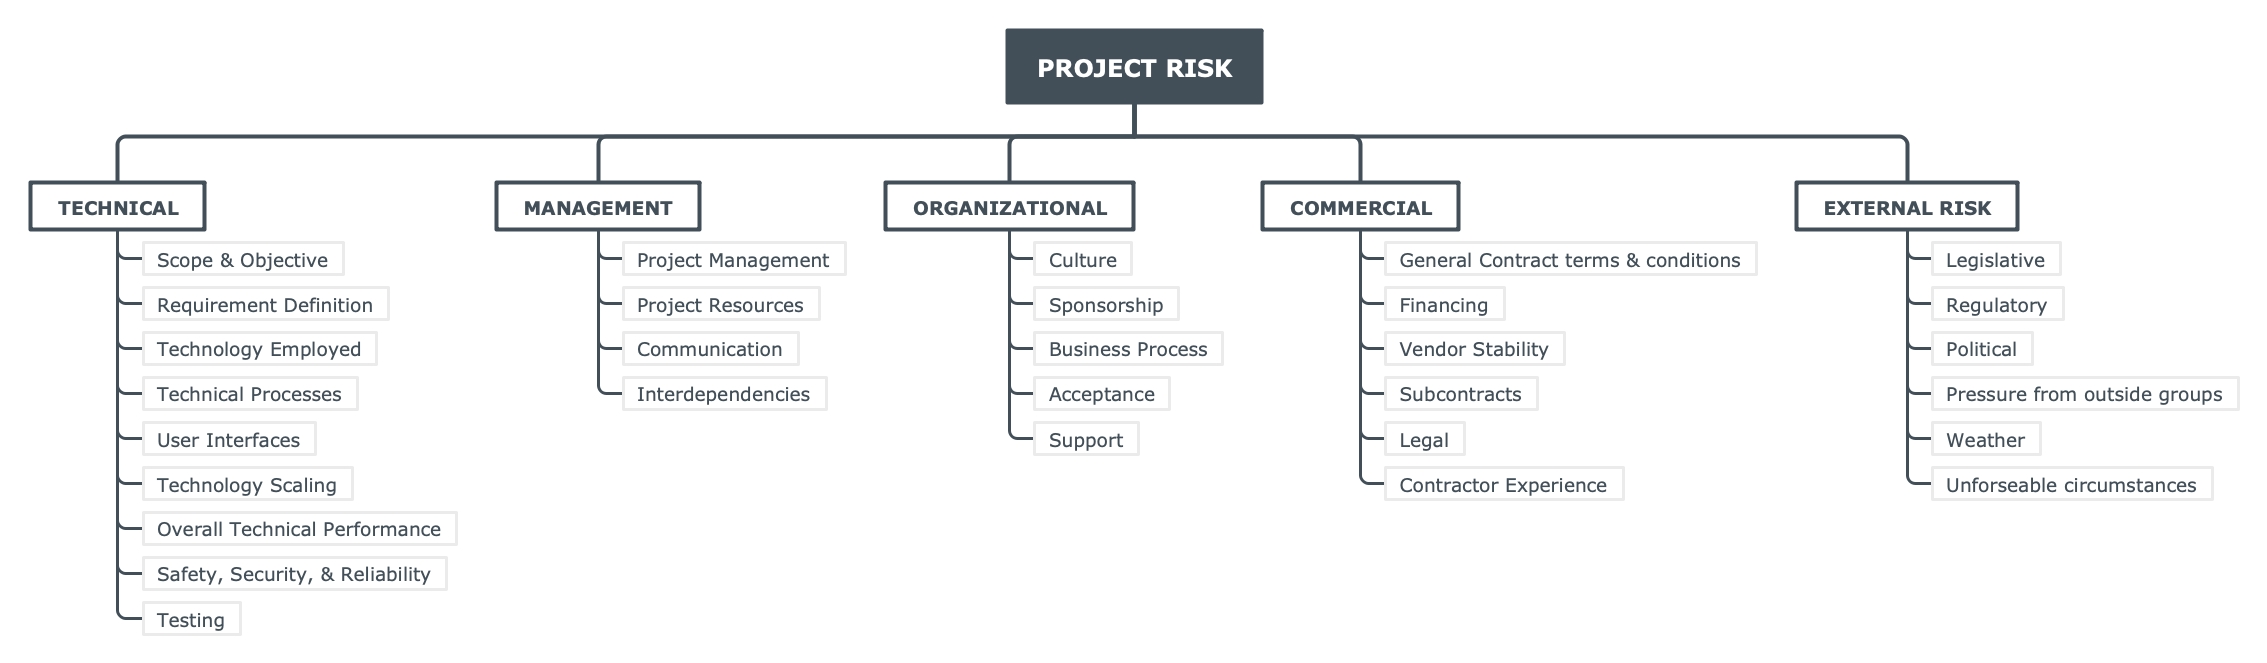 risk-breakdown-structure-explained-with-examples-edrawmind